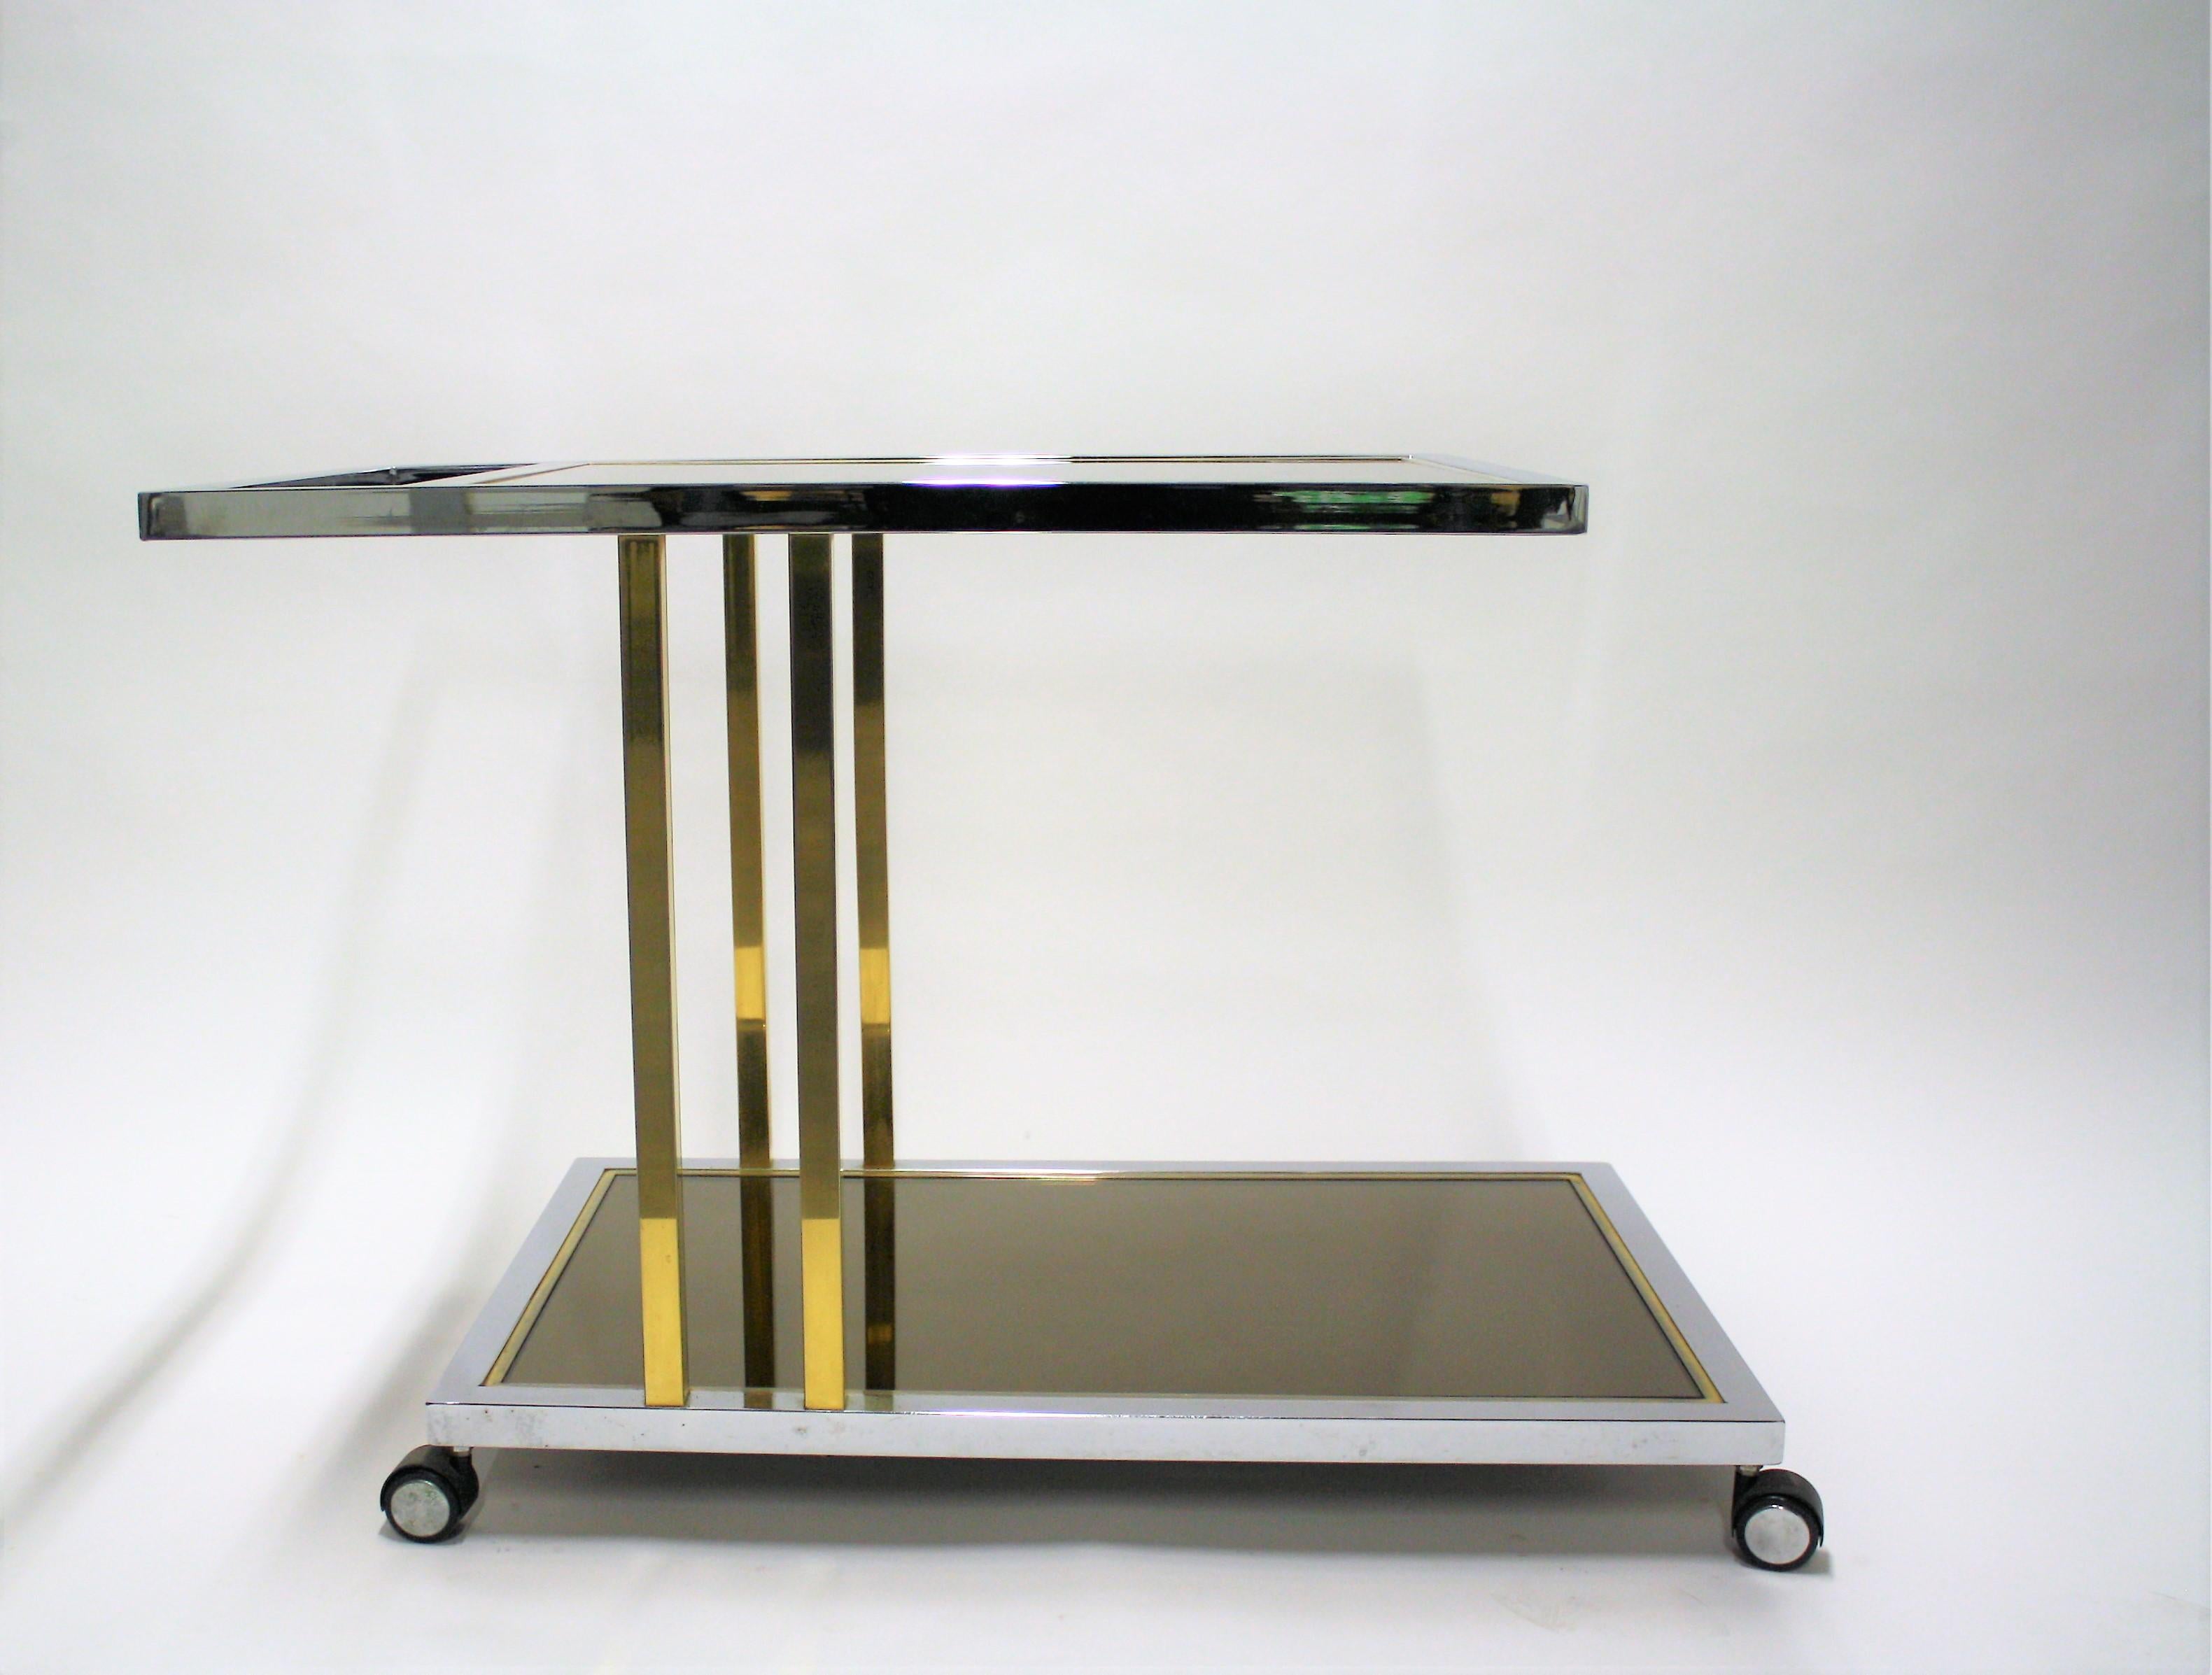 Vintage drinks trolley by Belgo Chrome.

This two-tier cart consists of a smoked glass top and a mirrored glass lower shelve and is made of brass and chrome.

Polished brass and chrome.

Good condition, minor scratches on the glass.

1970s,